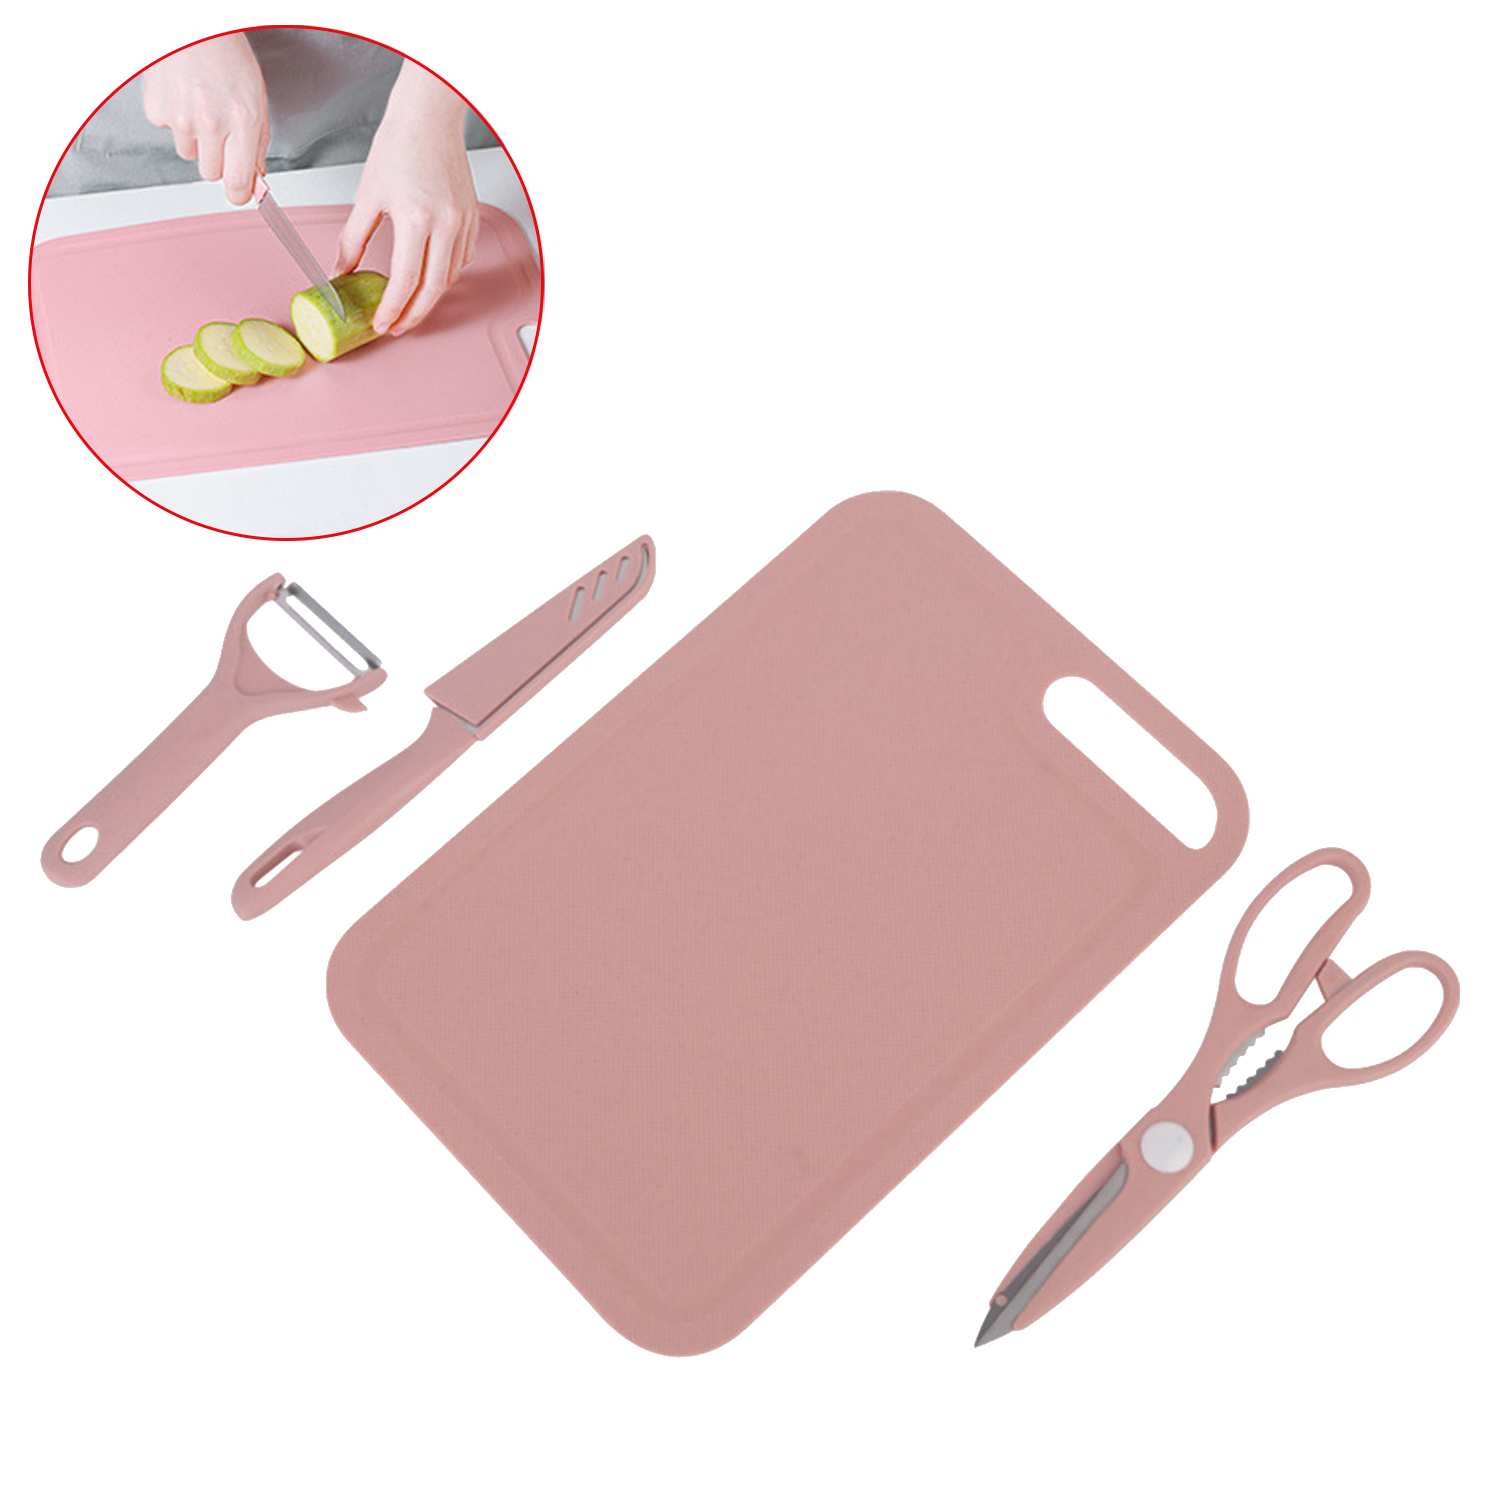 Kitchen Gadgets Chopping Board Set Stainless Steel Kitchen Knife Set Knife Chopping Board Fruit Vegetable Peelers Kitchen Gadgets Knife Set